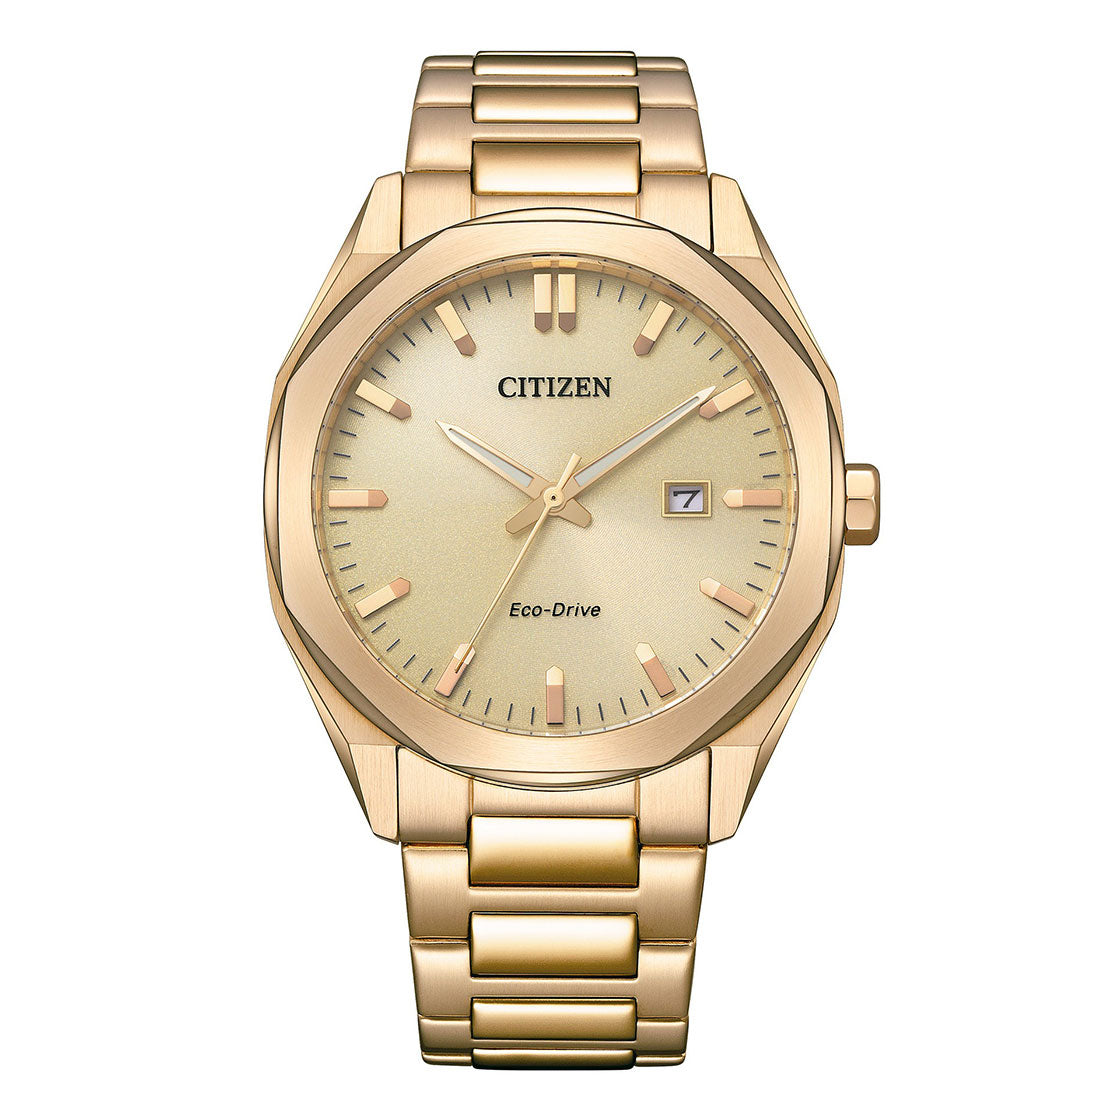 CITIZEN ECO-DRIVE GENTS WATCH CHAMPAGNE DIAL - BM7603-82P - Kamal Watch Company